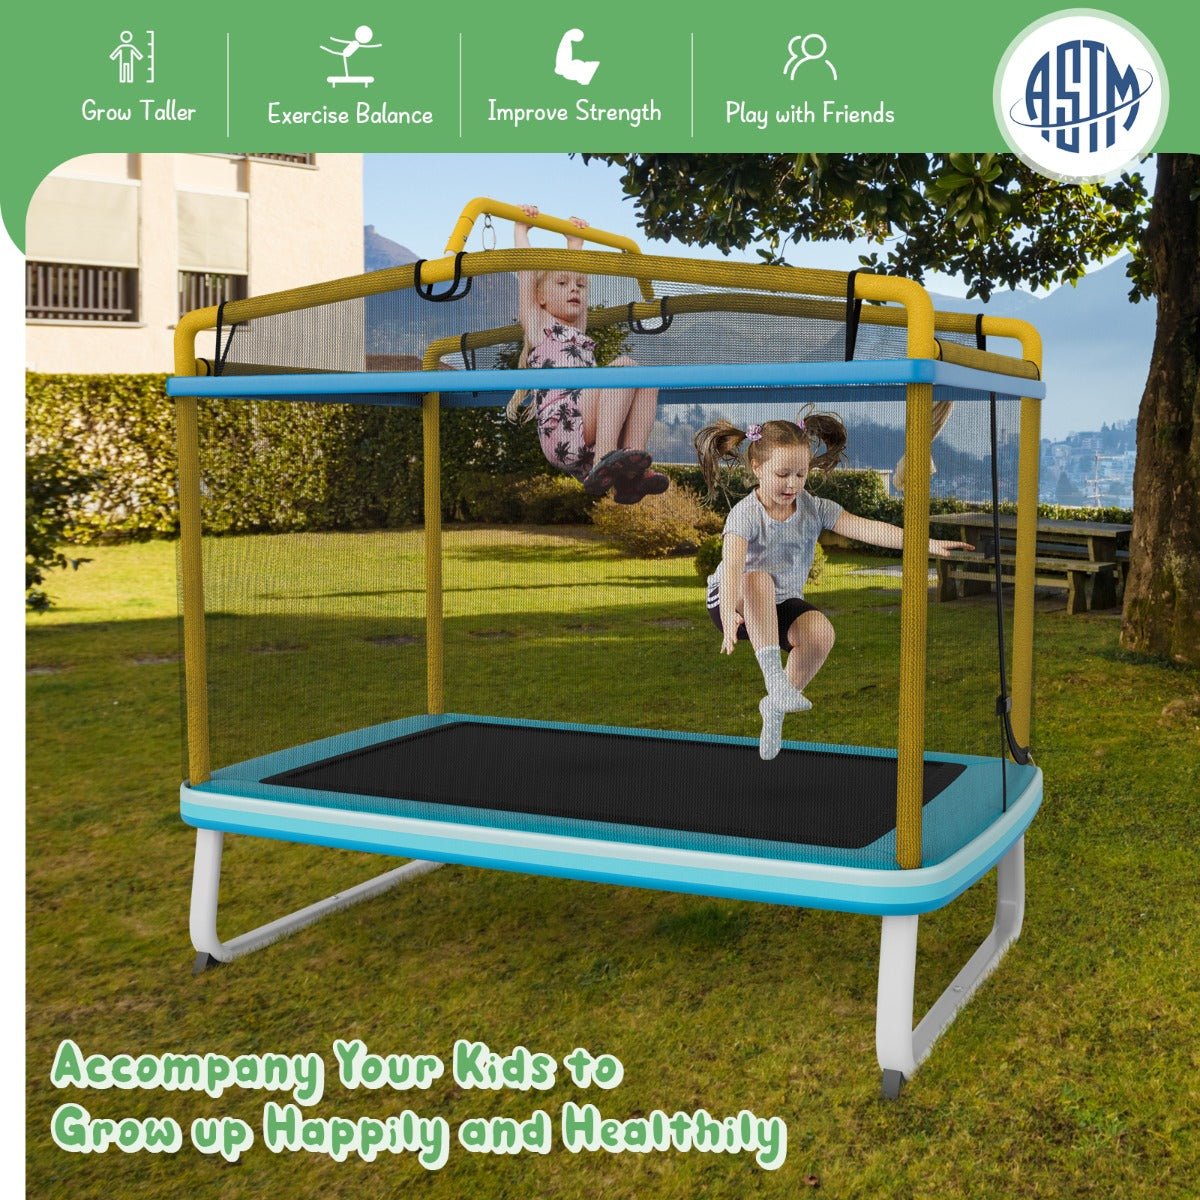 Swing and Bounce Thrills: 3-in-1 Rectangle Trampoline with Swing & Horizontal Bar Yellow